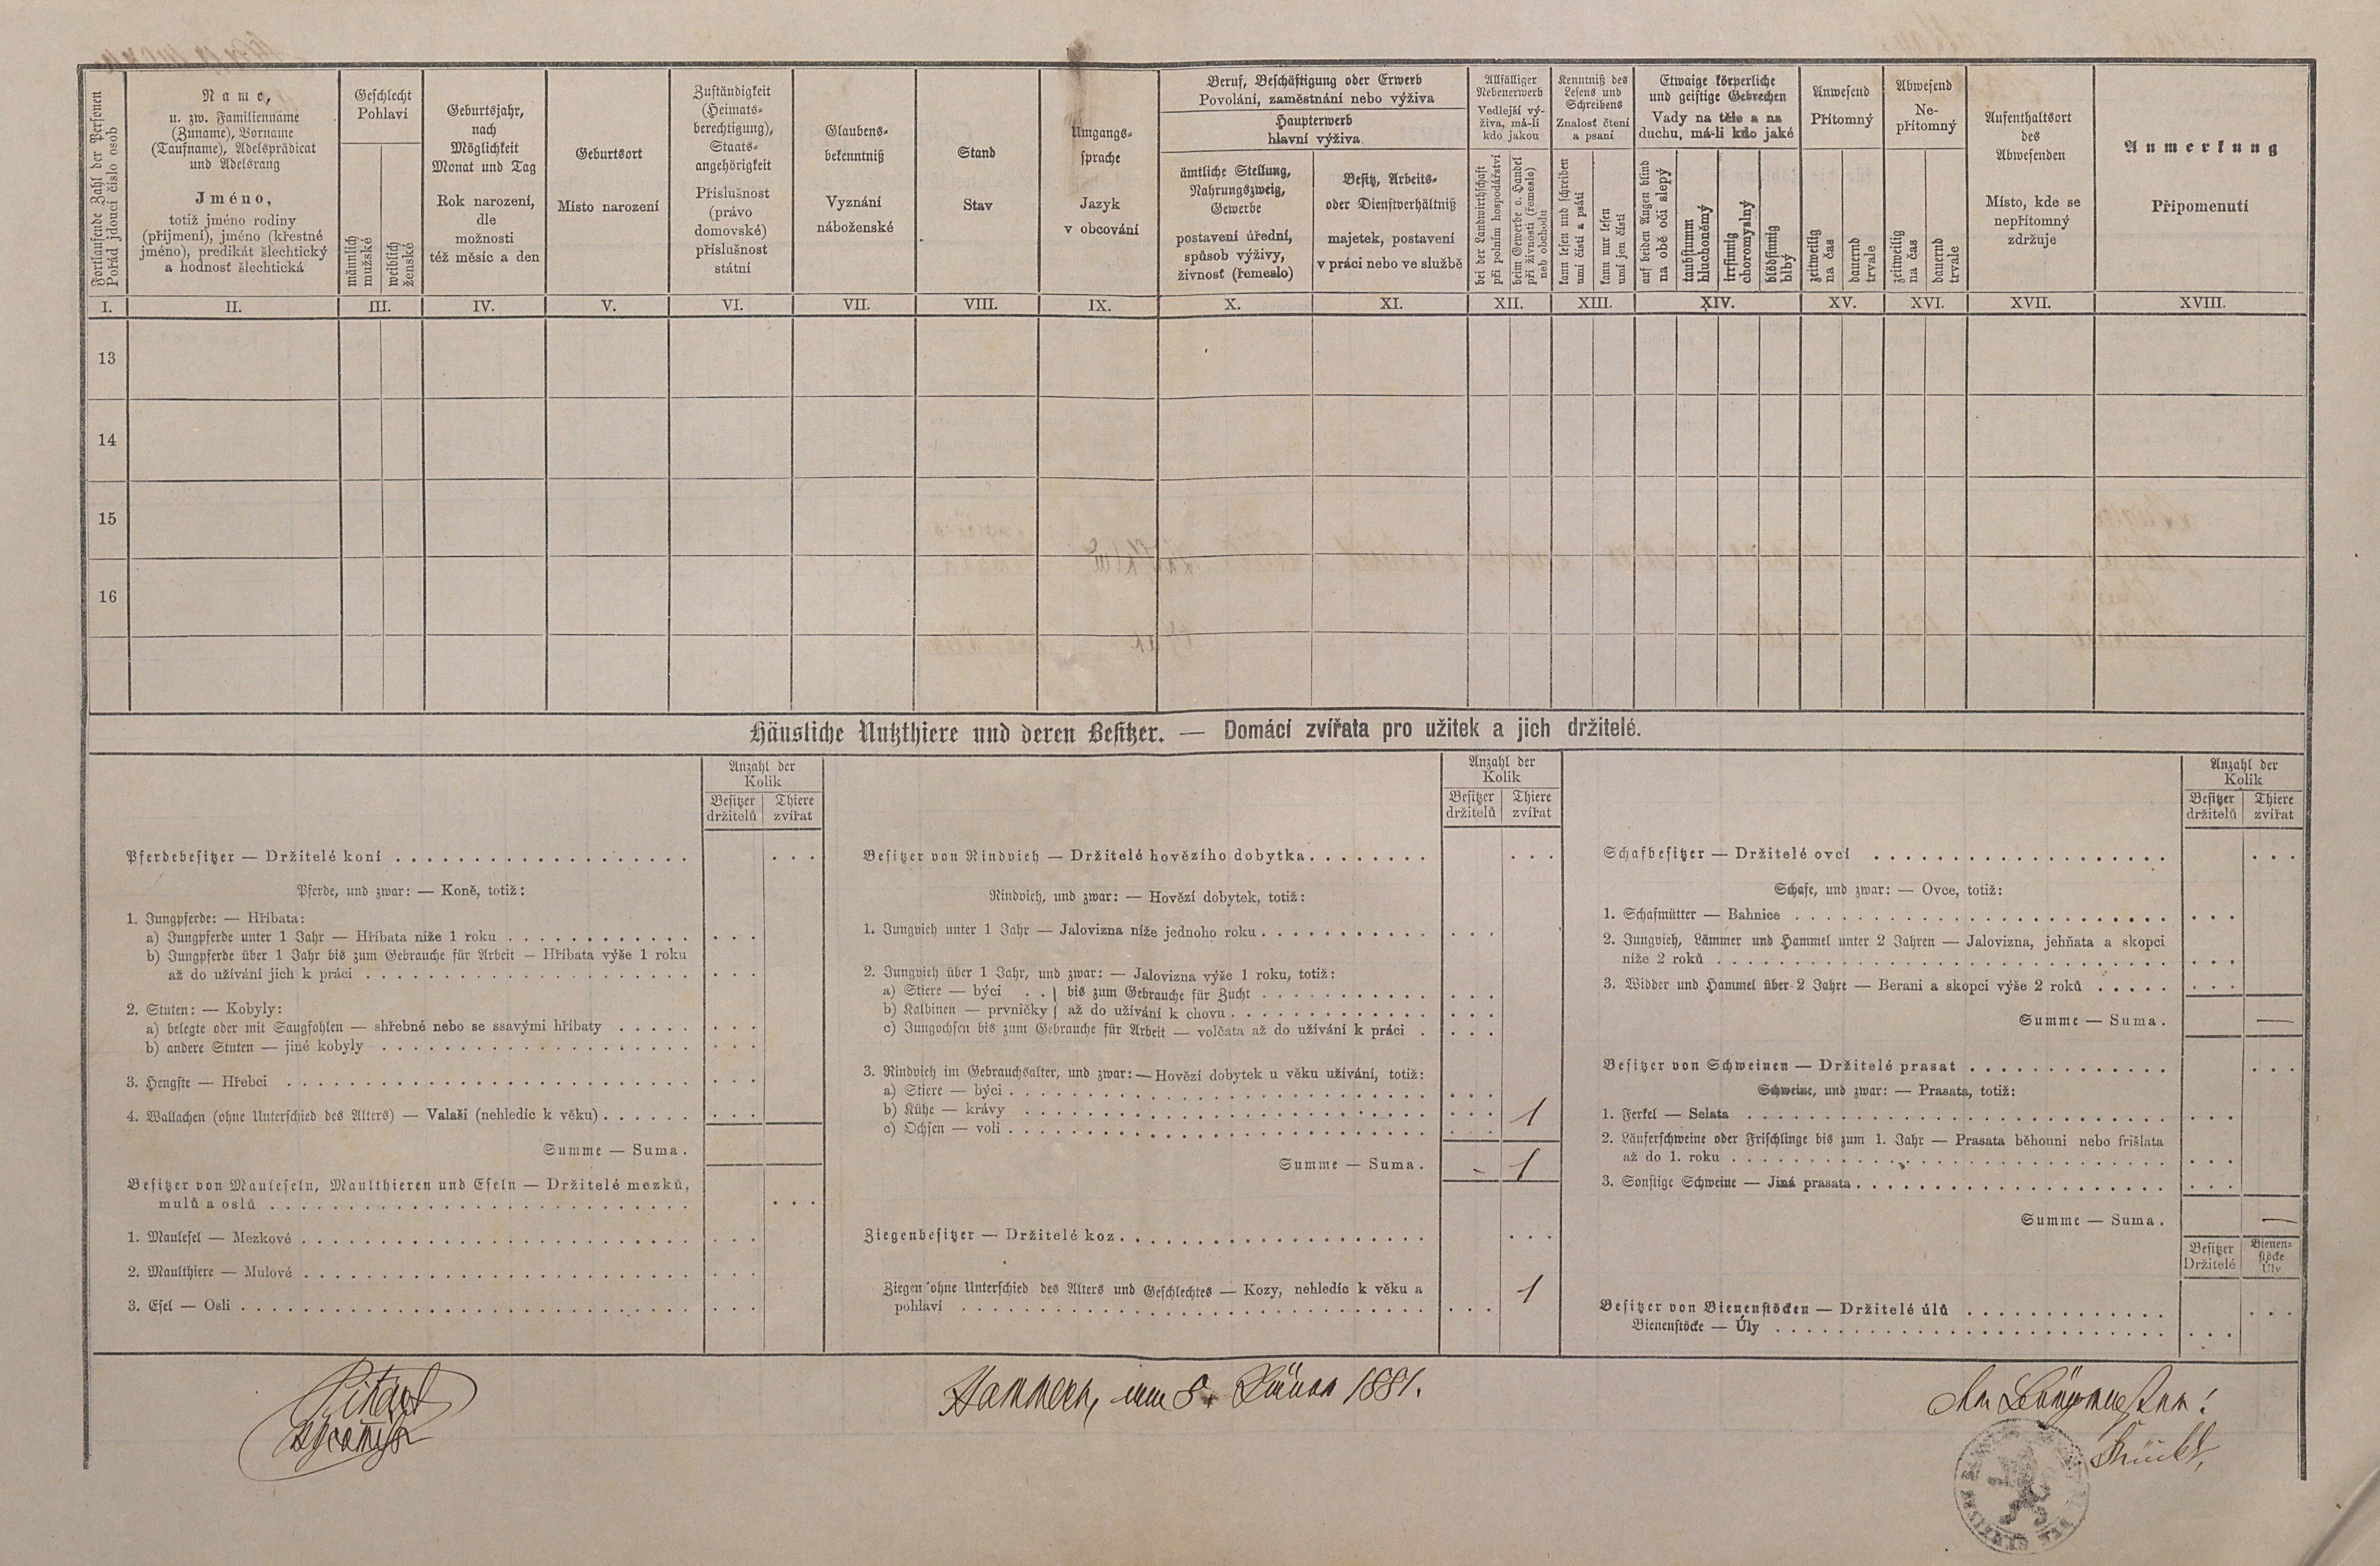 2. soap-kt_01159_census-1880-hamry-cp092_0020